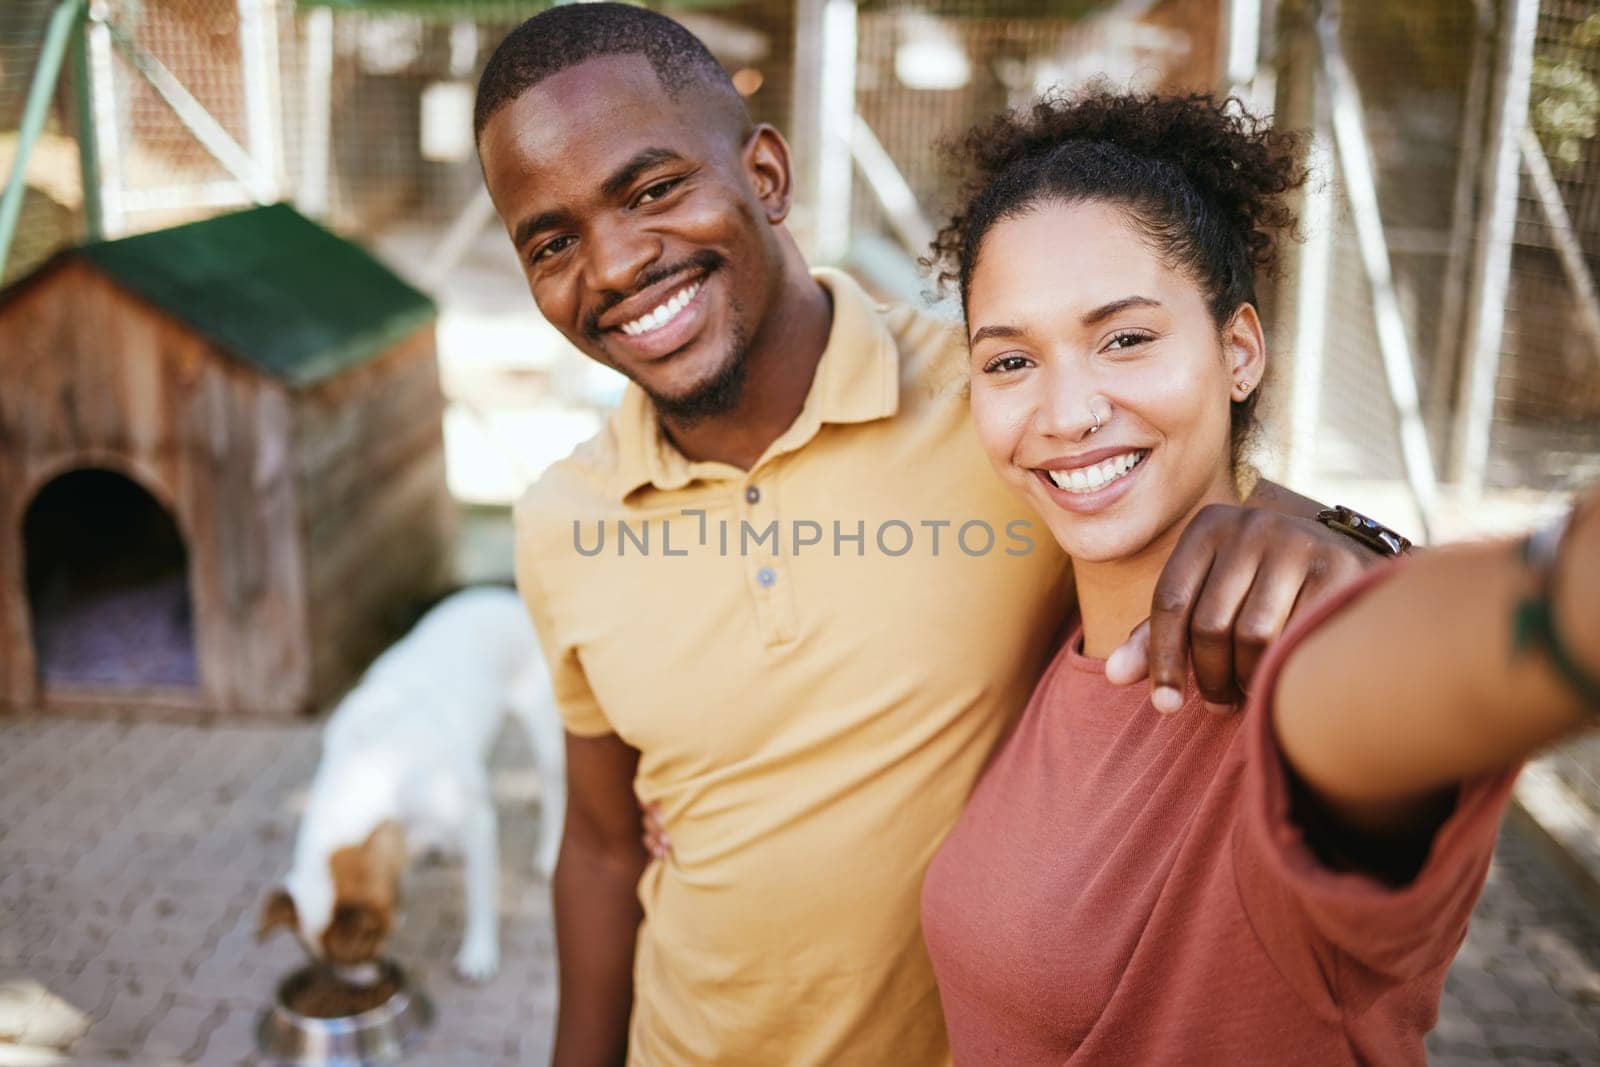 Love, dog or couple of friends take a selfie at an animal shelter or adoption center for homeless dogs. Pets, face portrait or black woman with a fun black man taking pictures as a happy black couple.